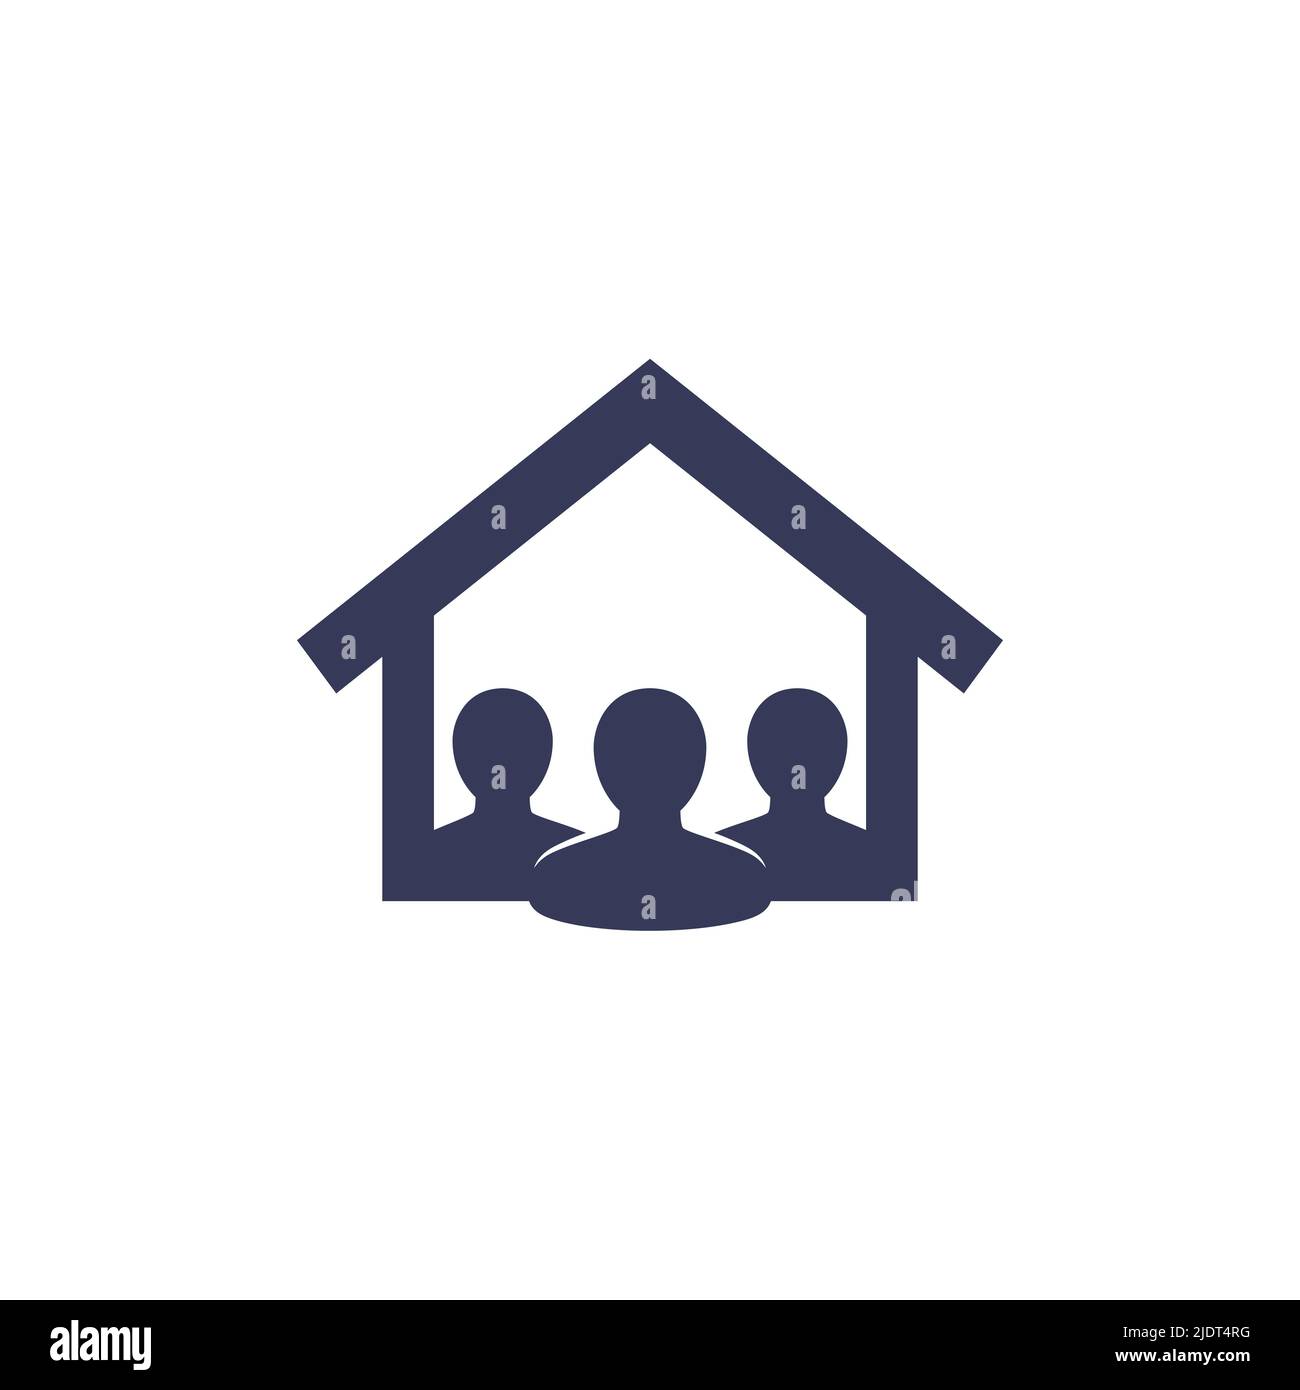 tenants icon, a house and 3 residents Stock Vector